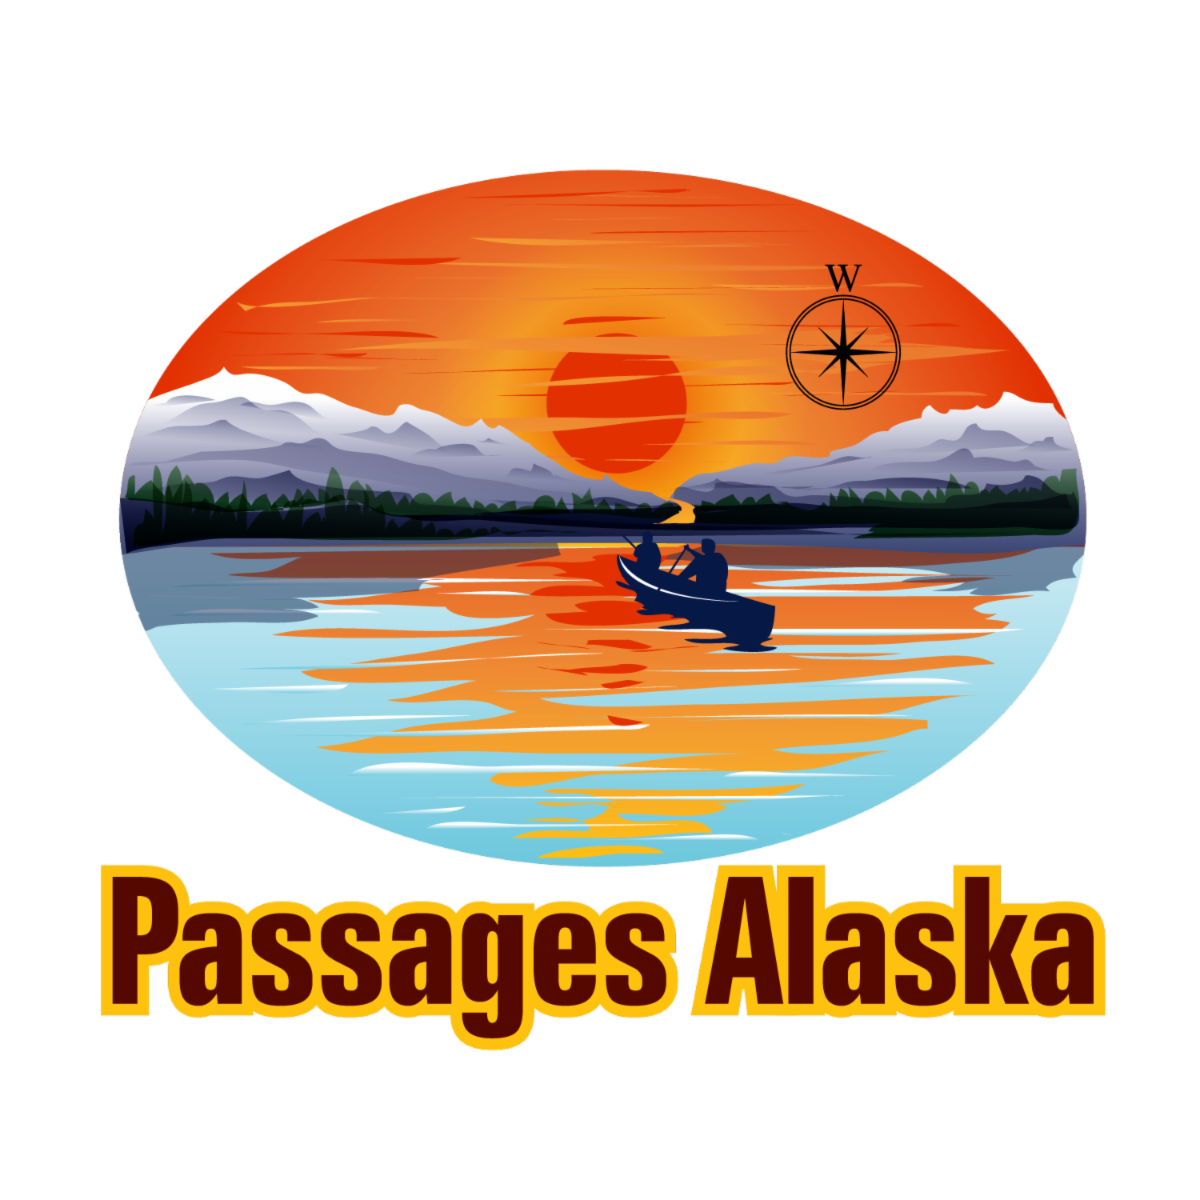 logo for Passages Alaska with a vivid sunset canoe & compass rose